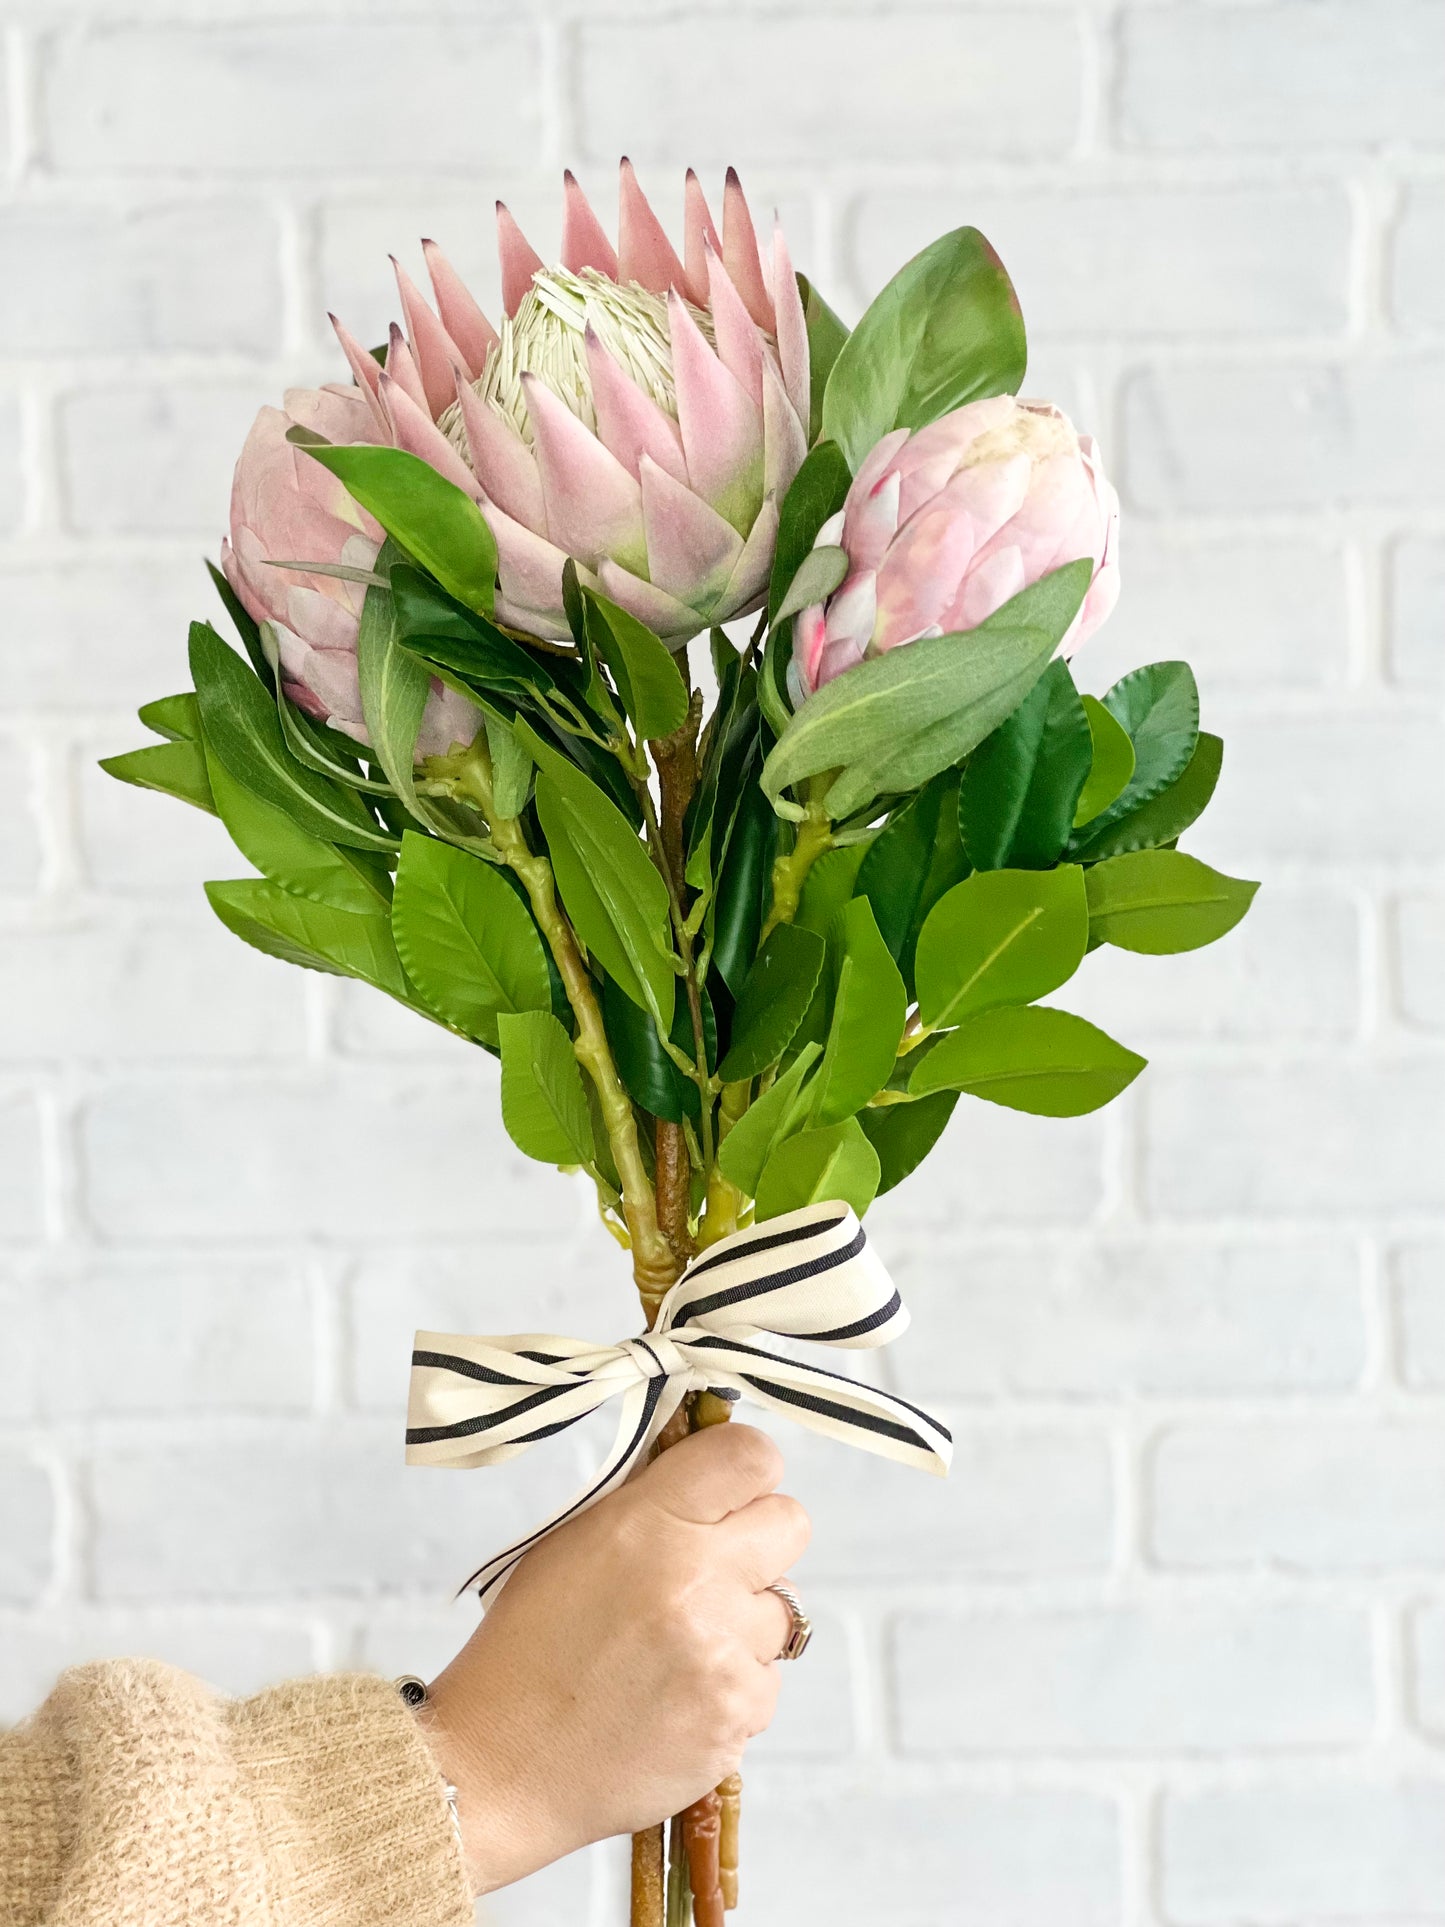 King and Queen Protea Bouquet